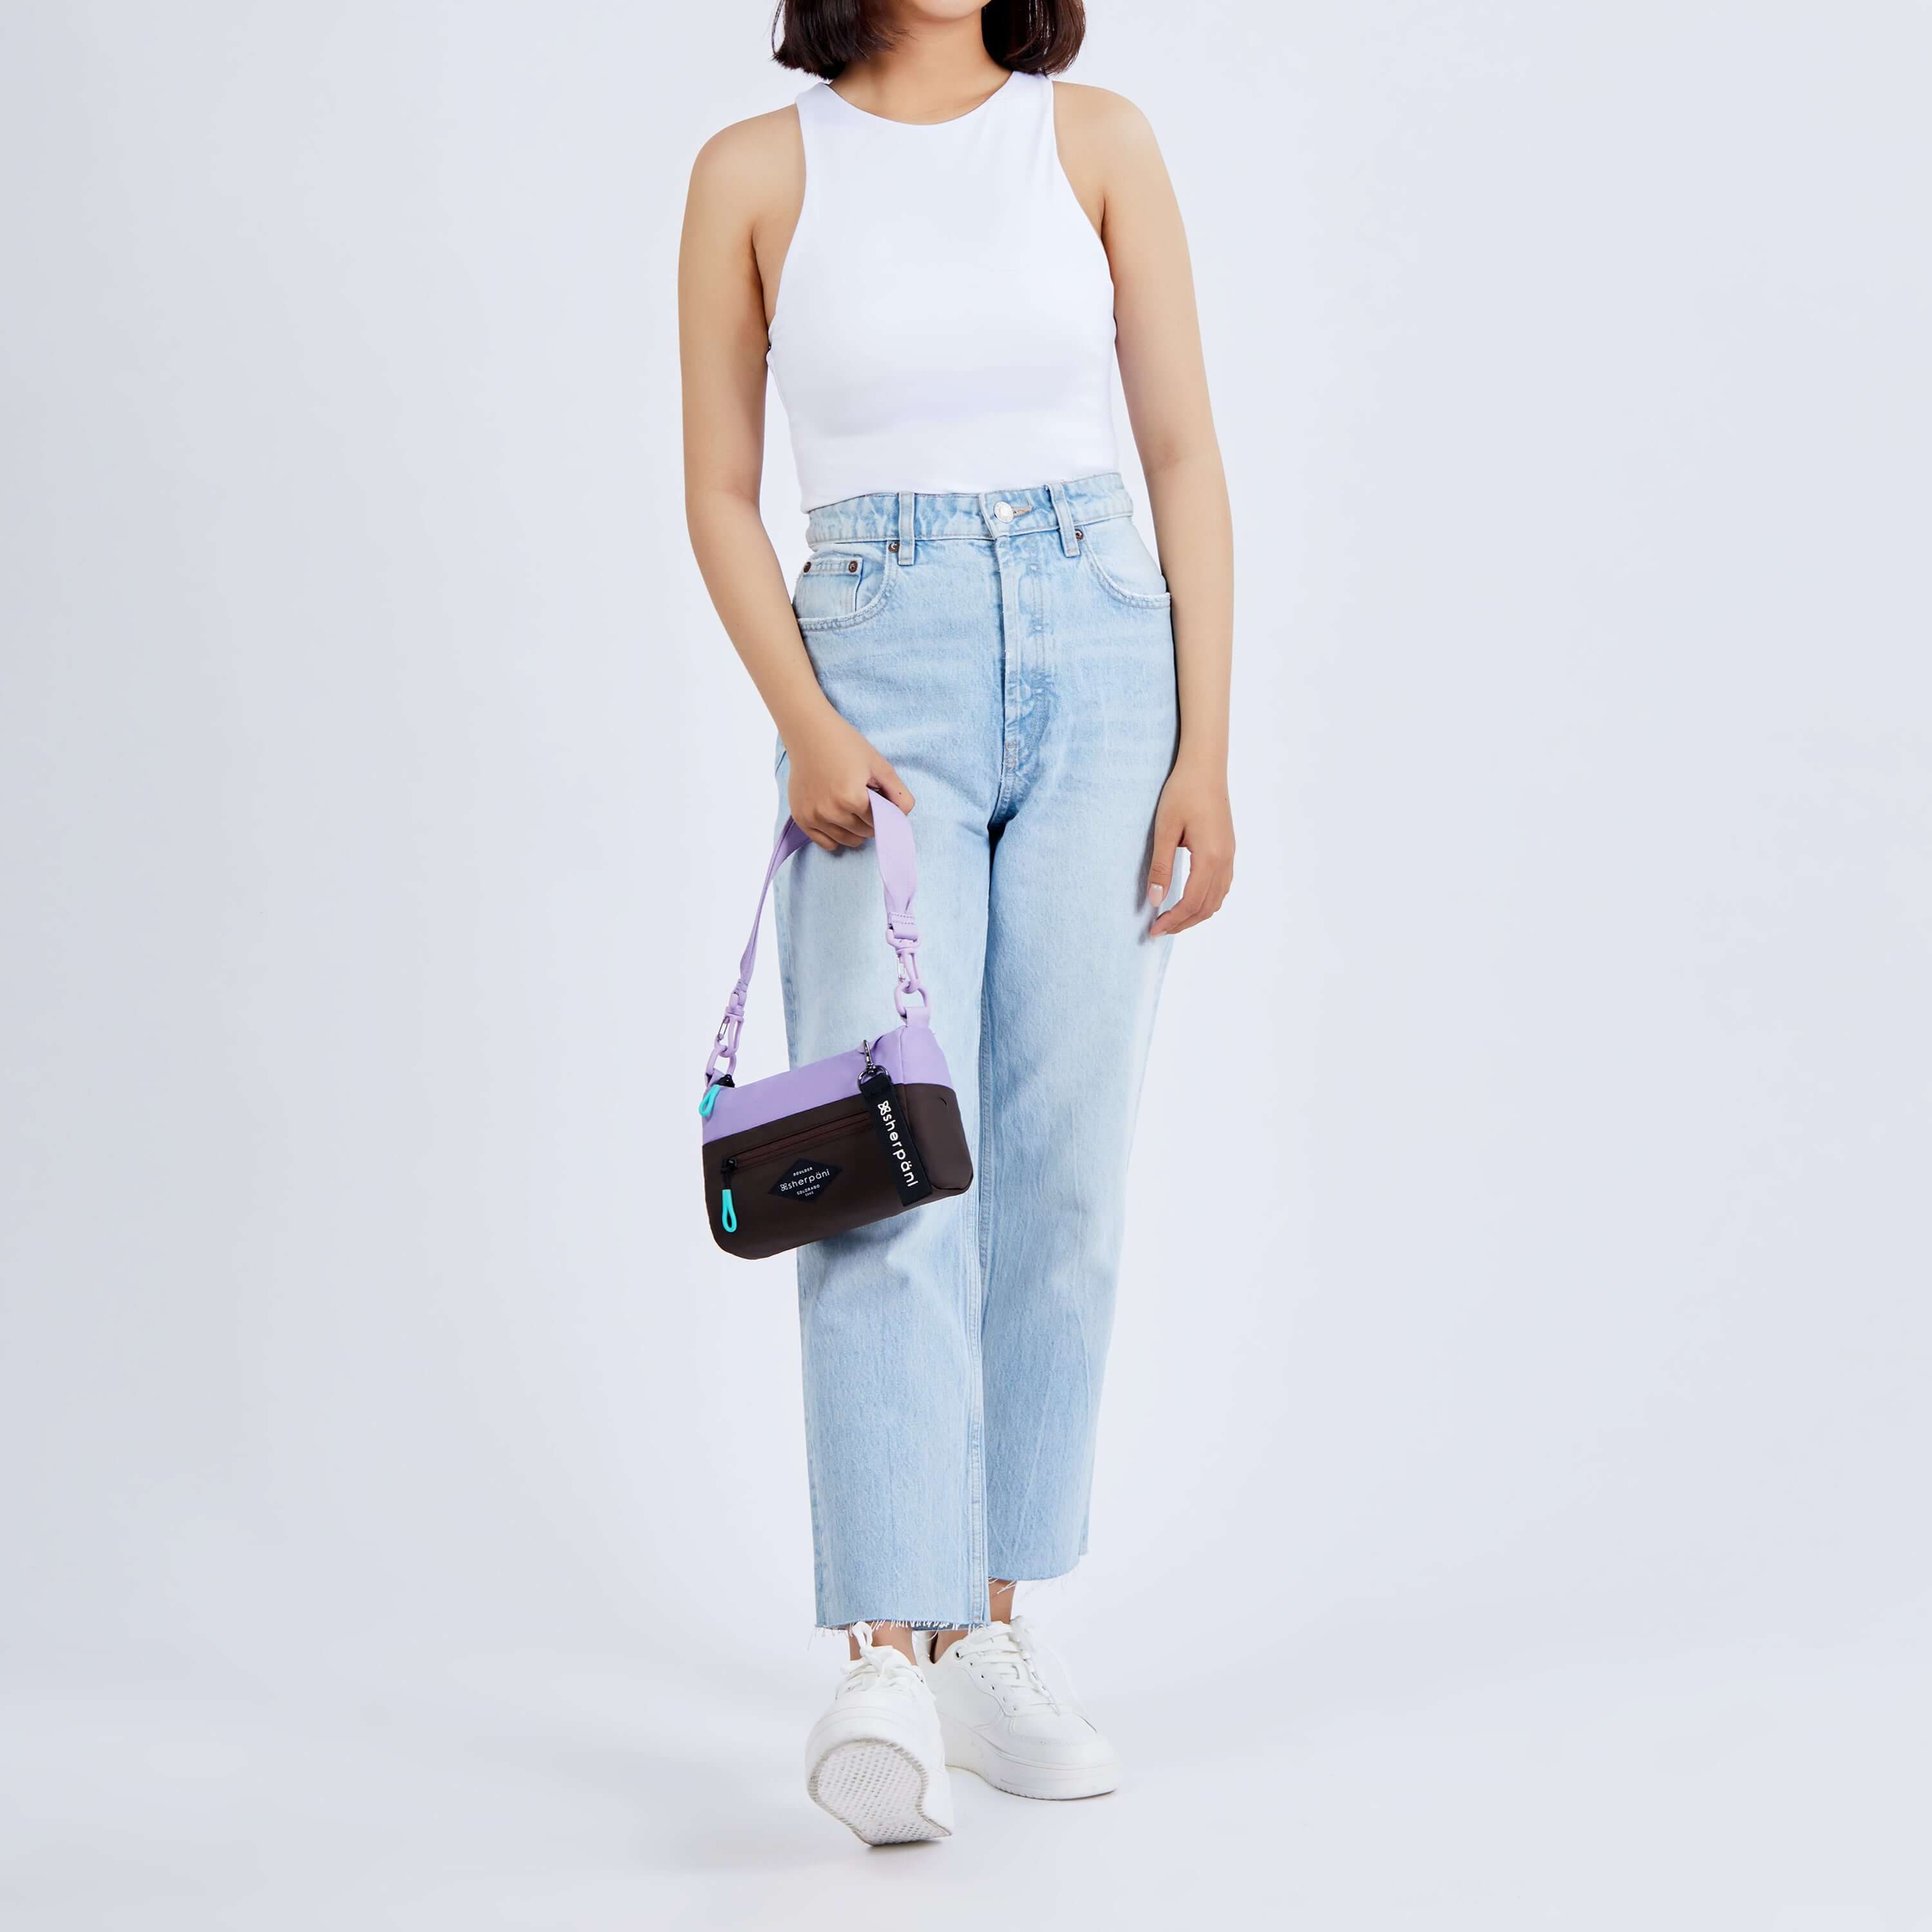 Full body view of a dark haired model facing the camera. She is wearing a white tank top, jeans and white sneakers. She carries Sherpani's purse, the Skye in Lavender, by her side. 